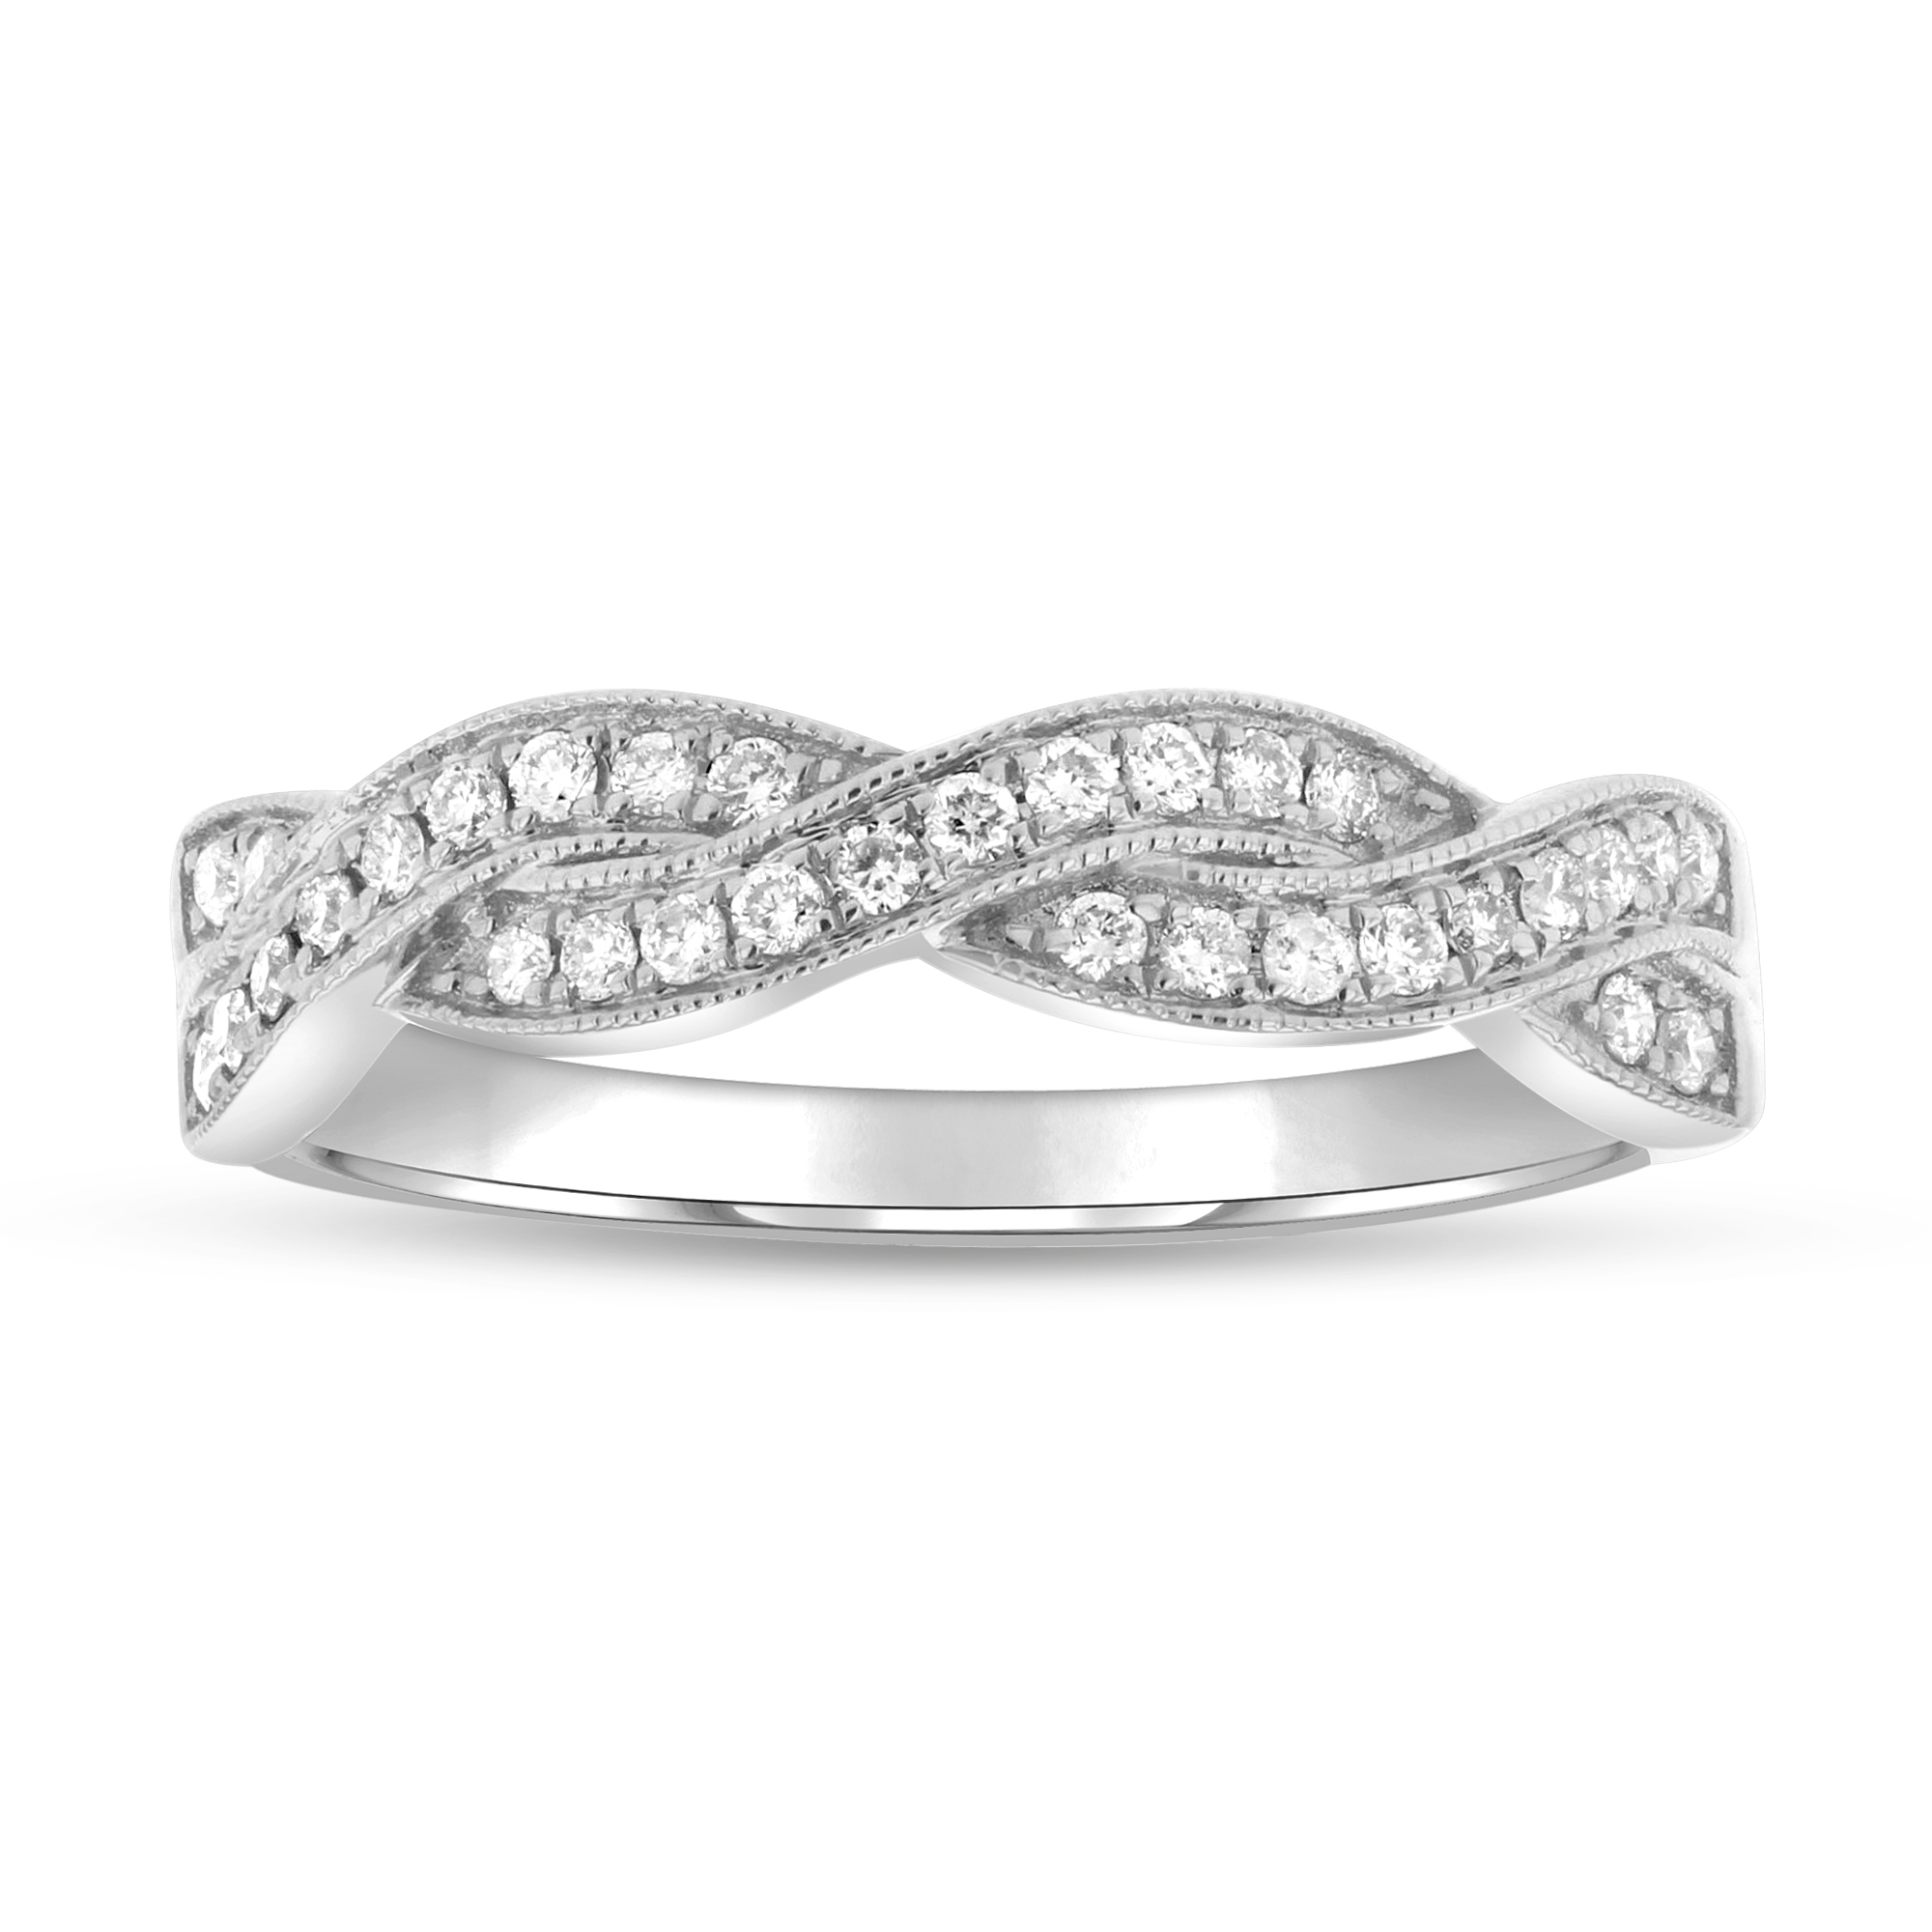 View 0.22ctw Diamond Crossover Band in 14k White Gold